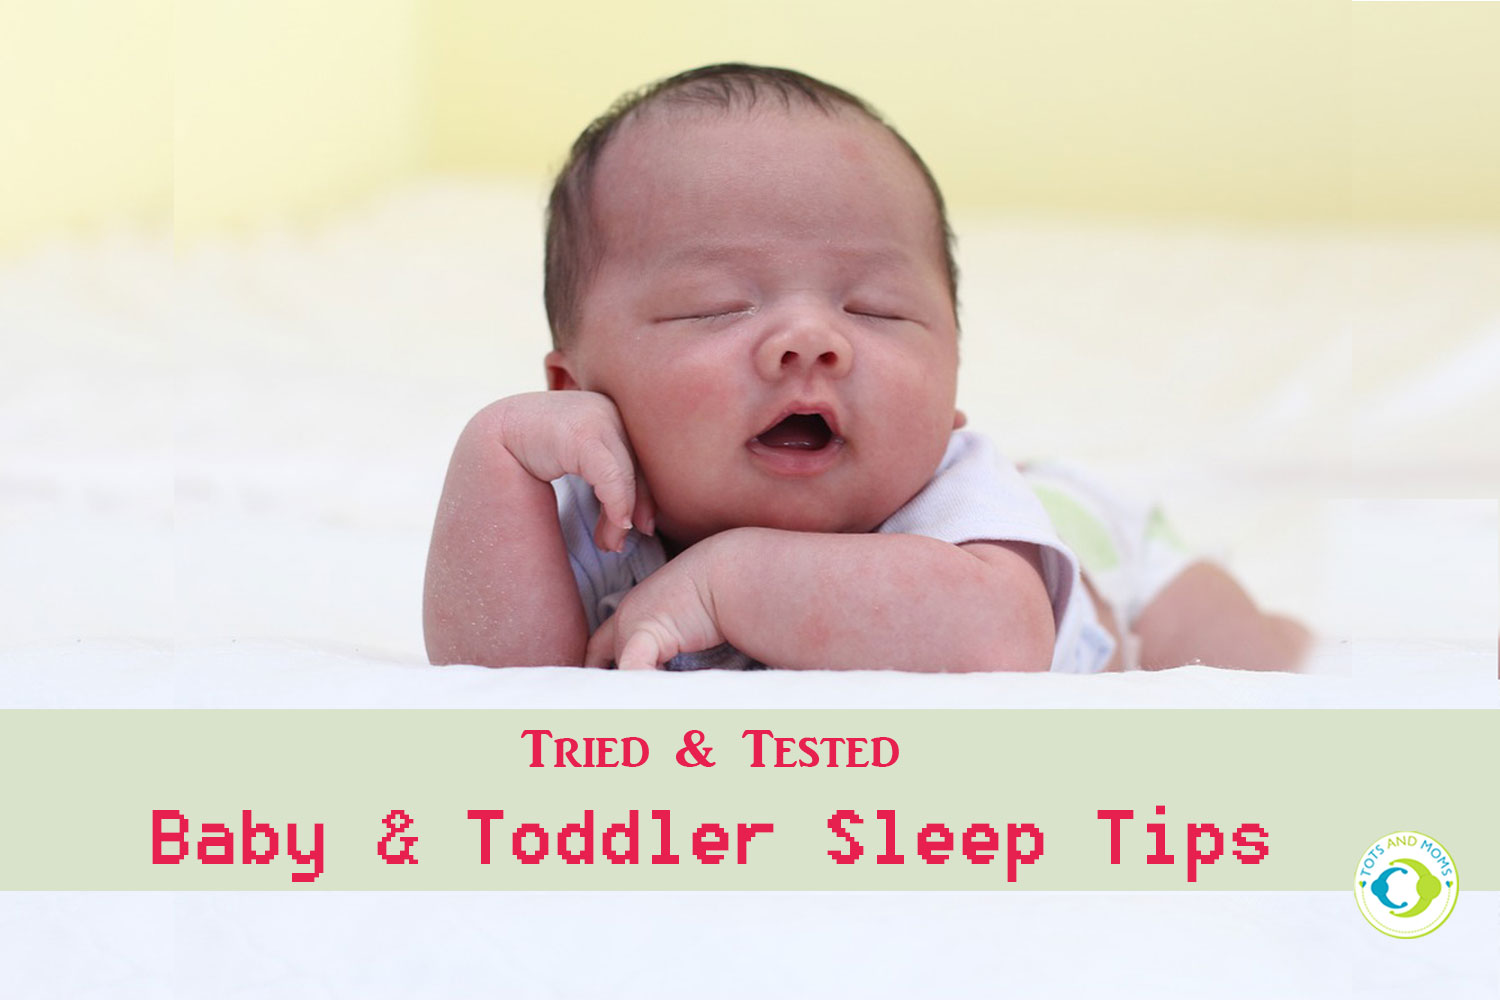 Indian Baby and Toddler Sleep Tips - Tried & Tested